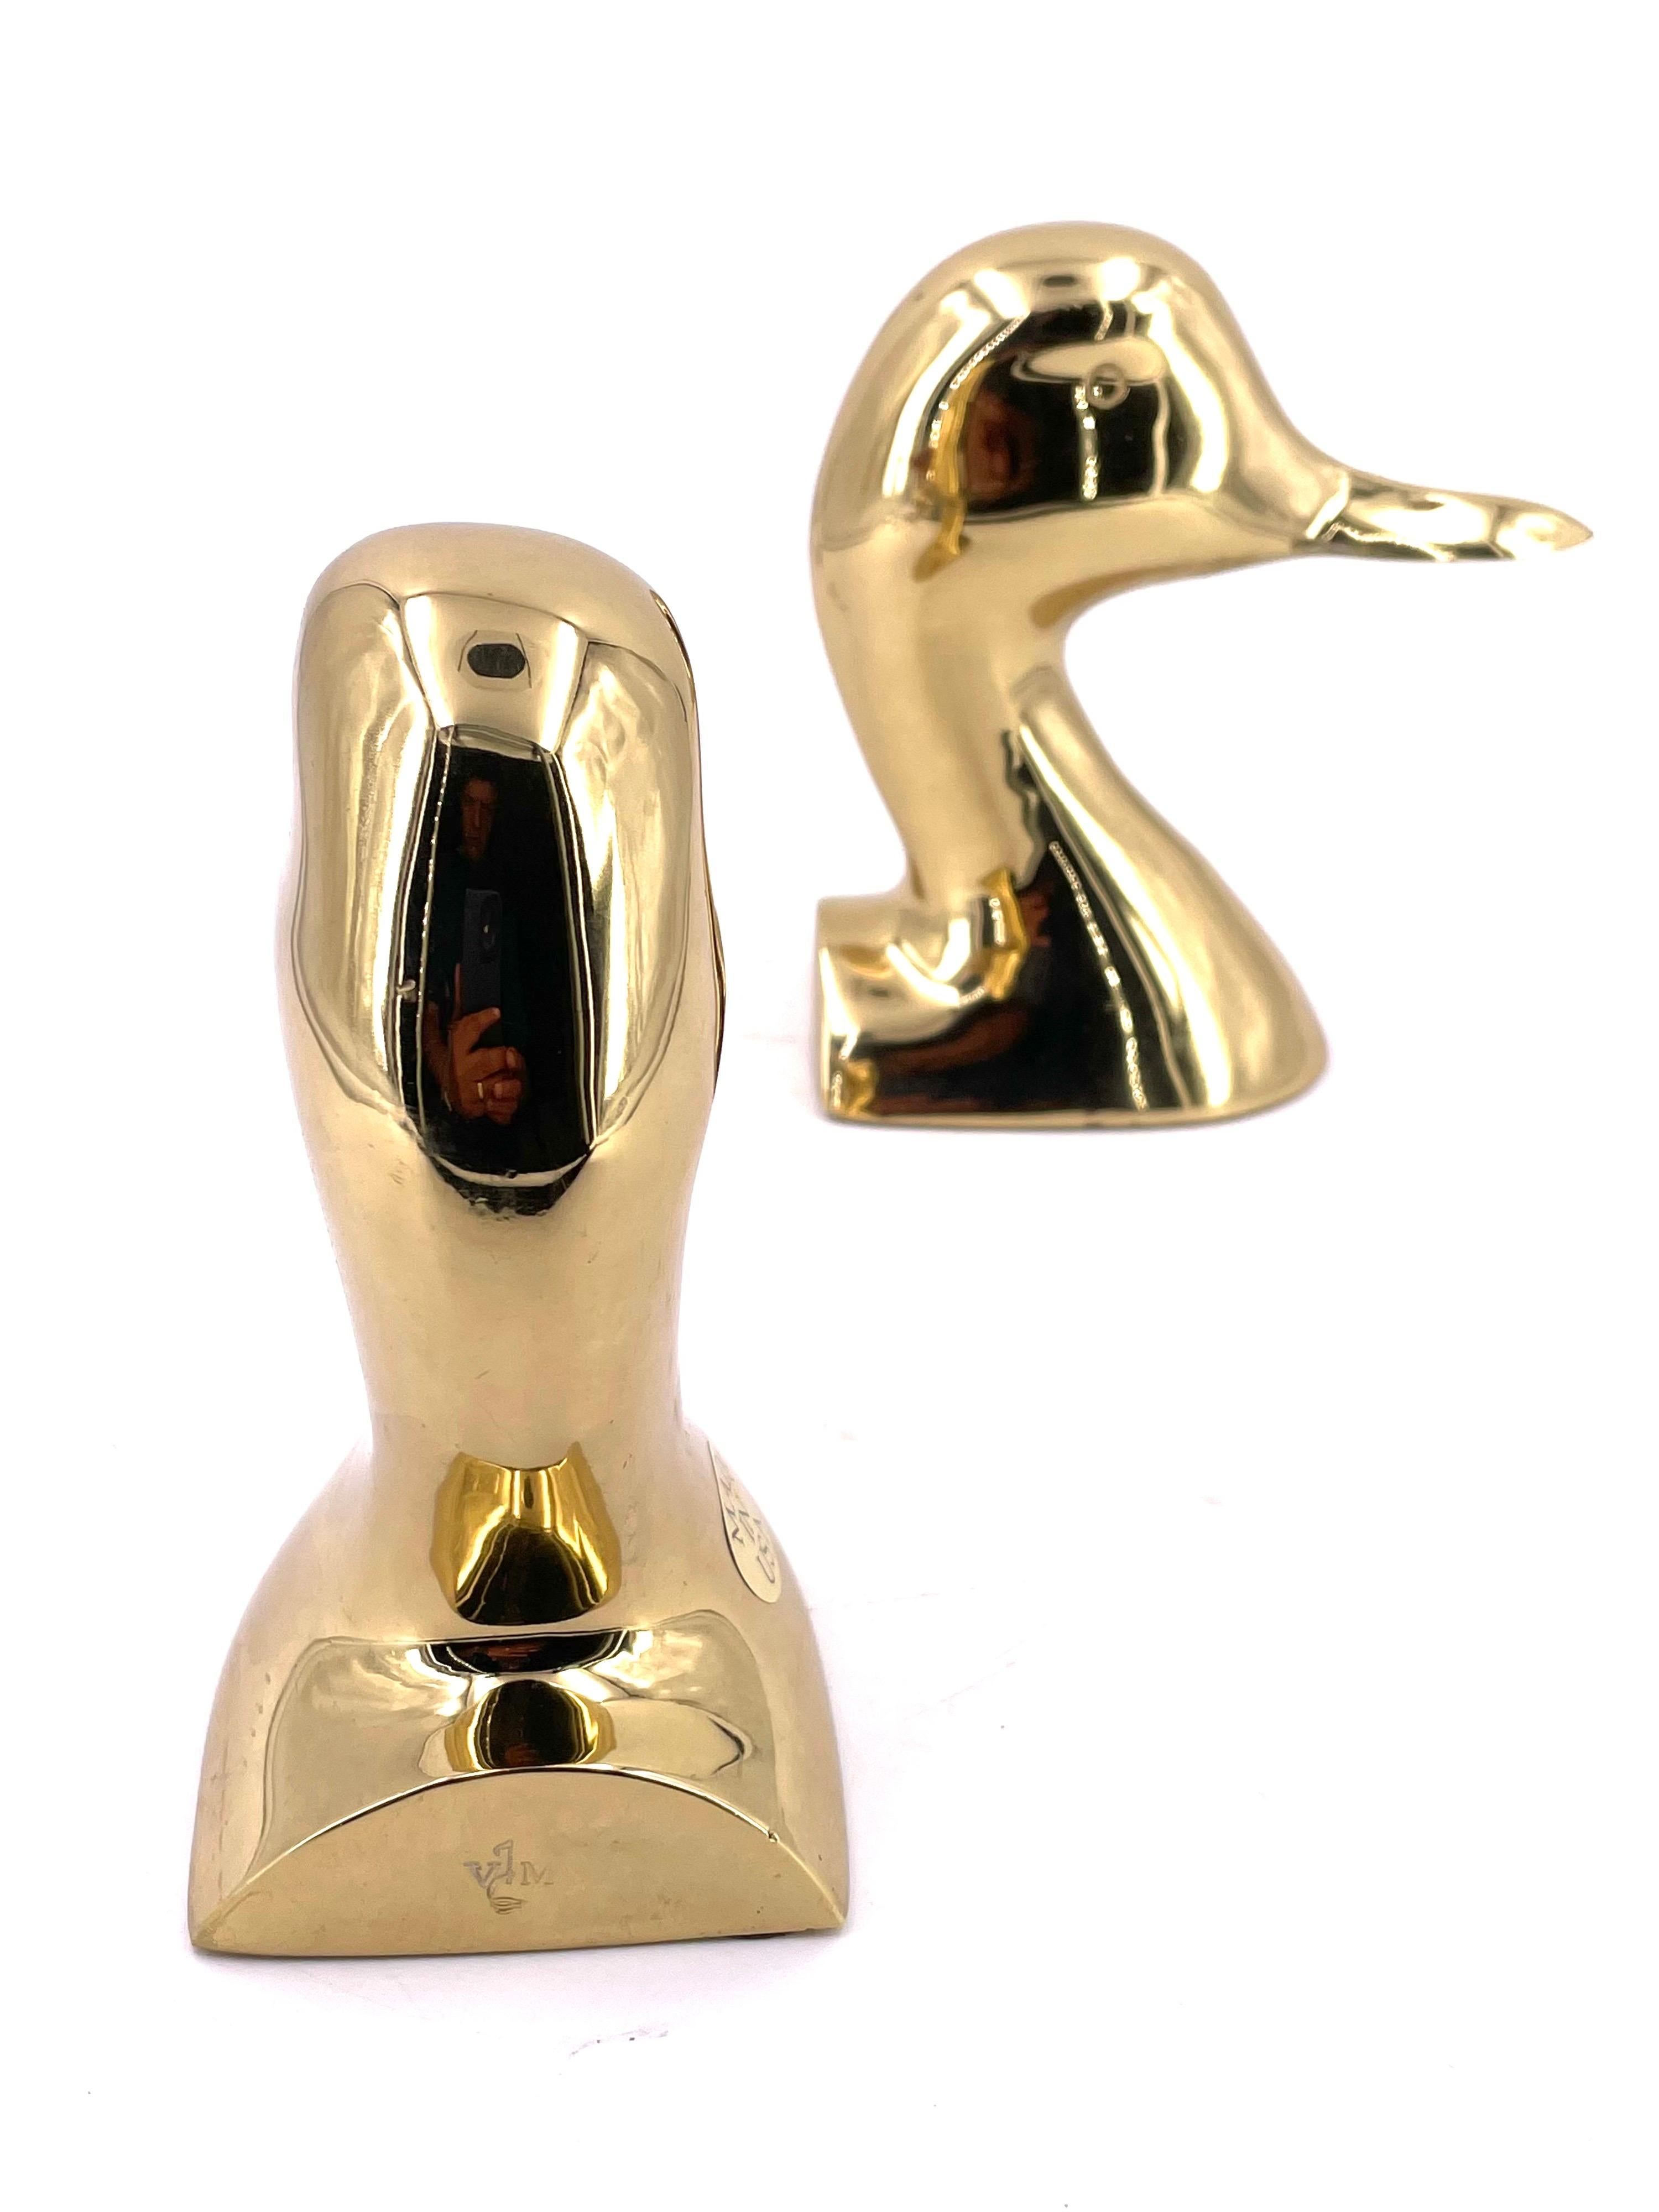 American Mid-Century Modern Solid Brass Duck Bookends